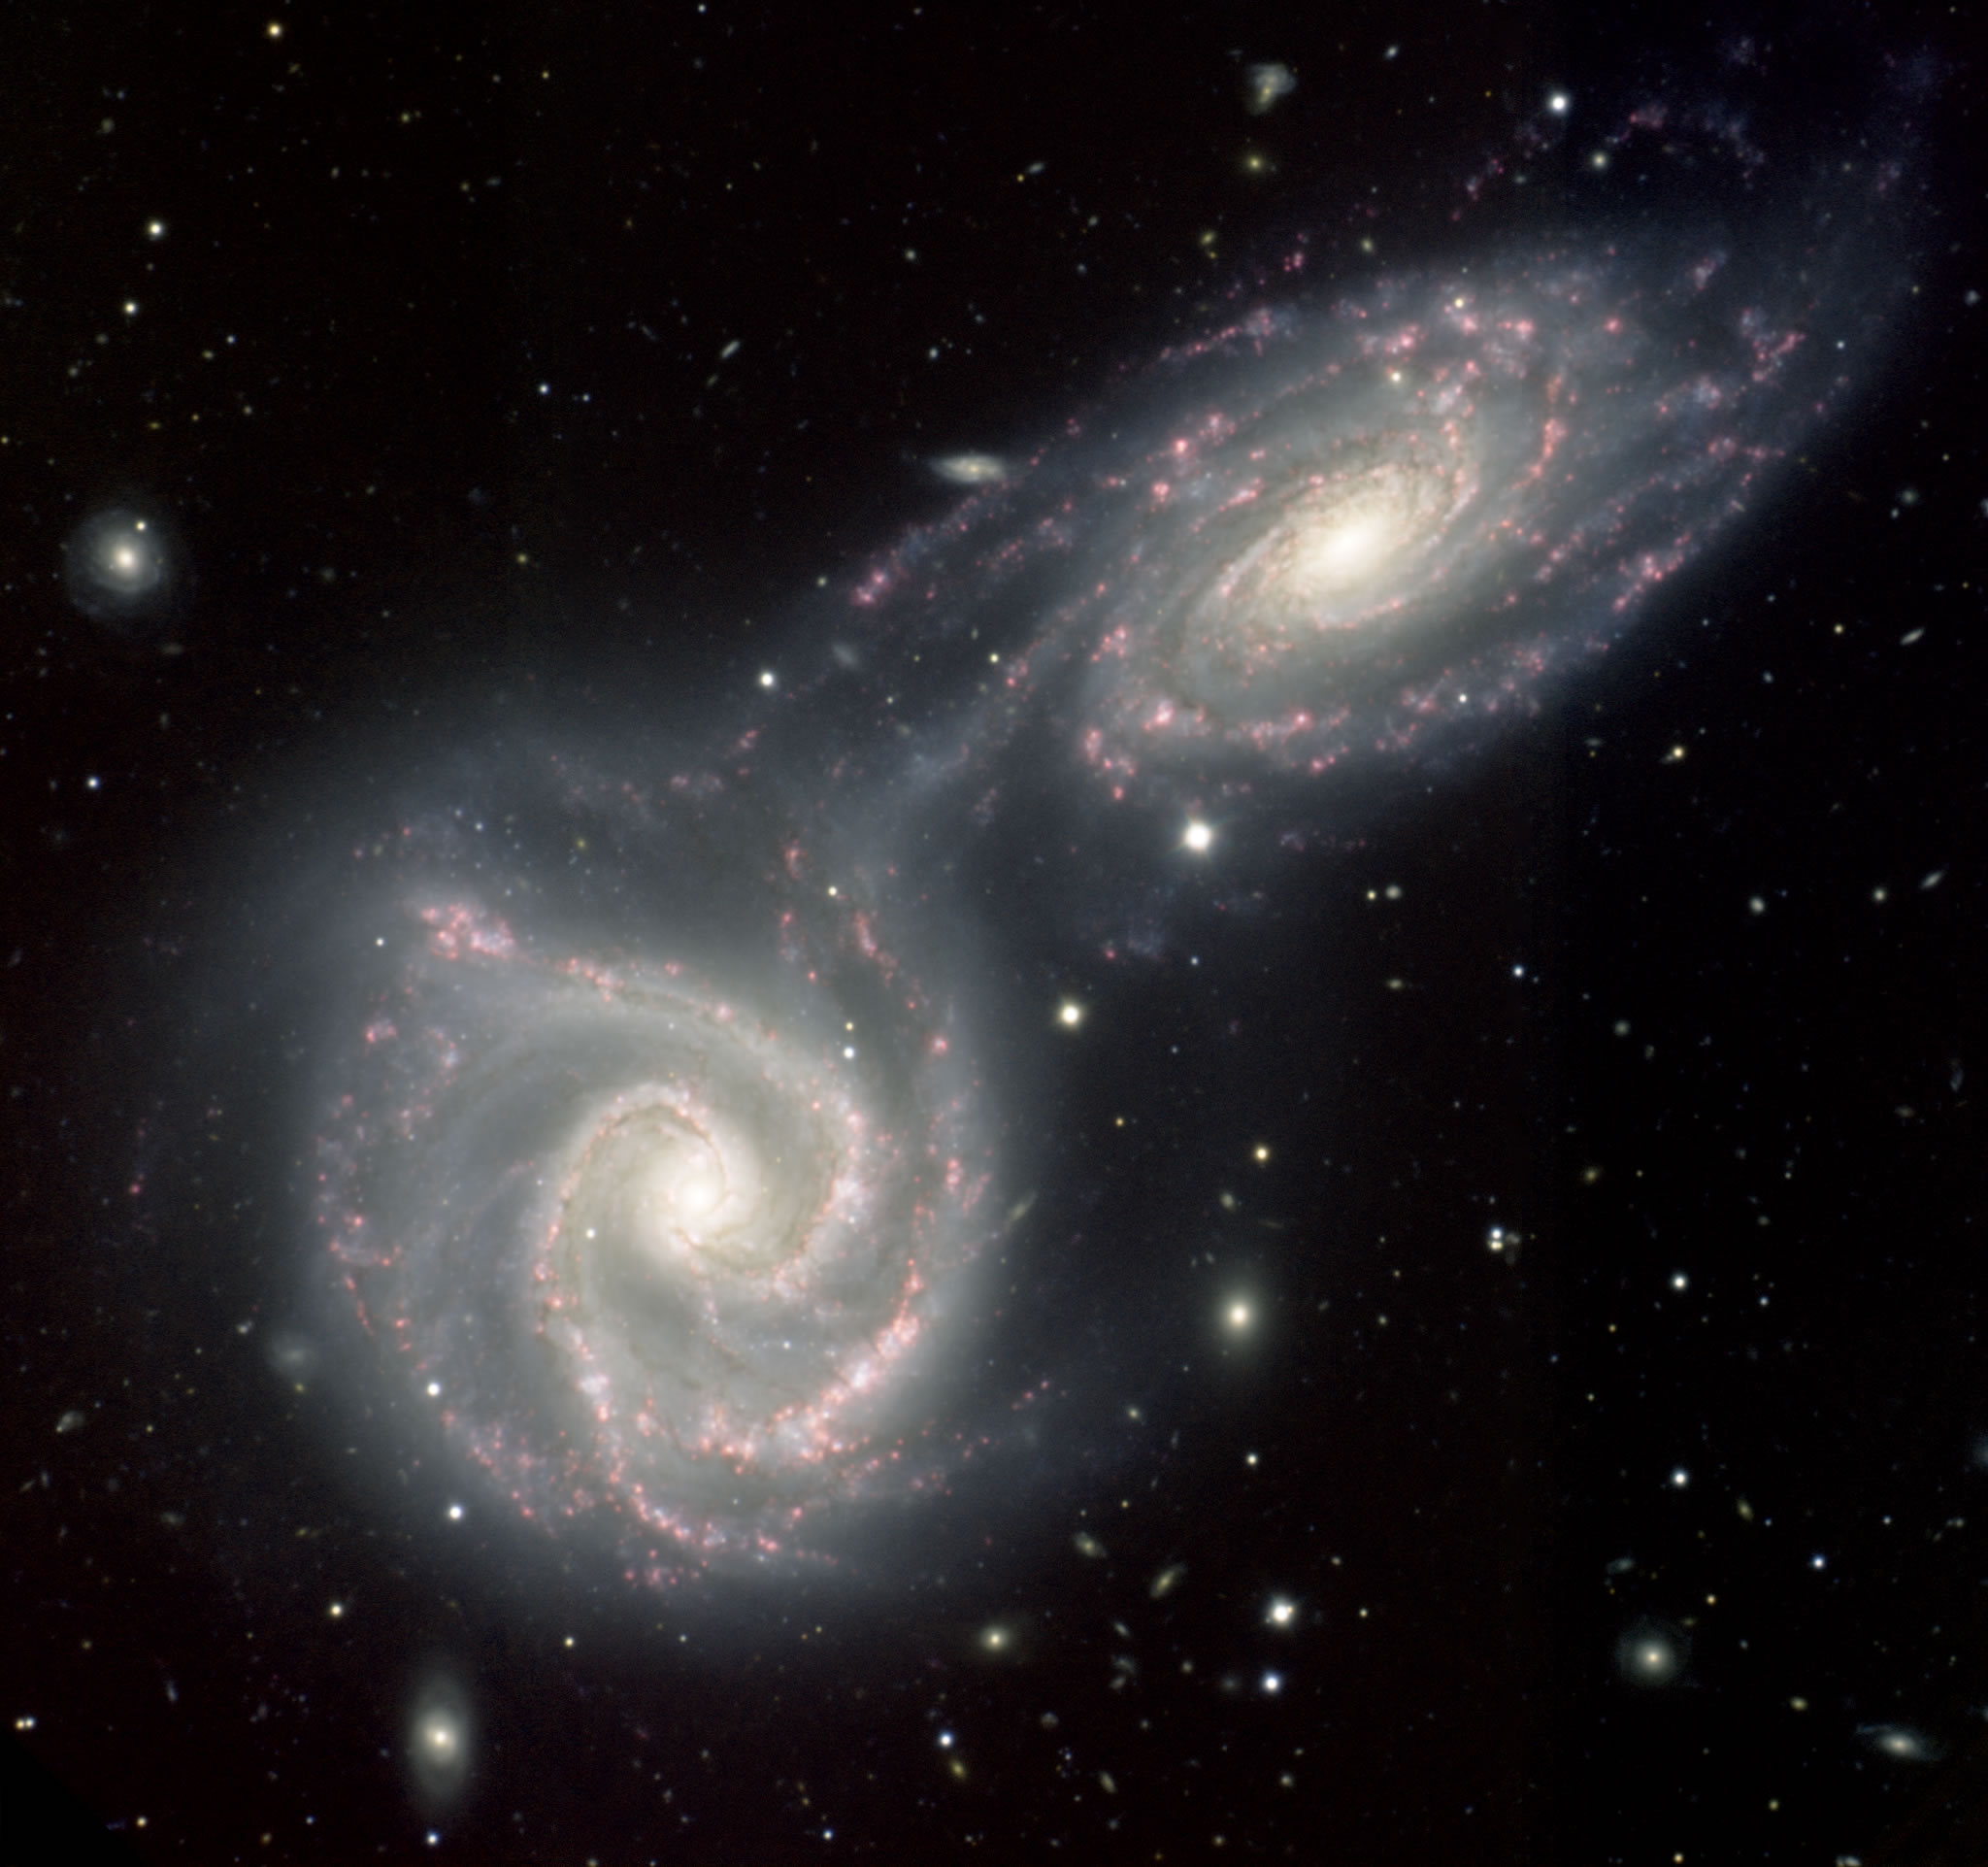 What happens after two galaxies collide? | Socratic